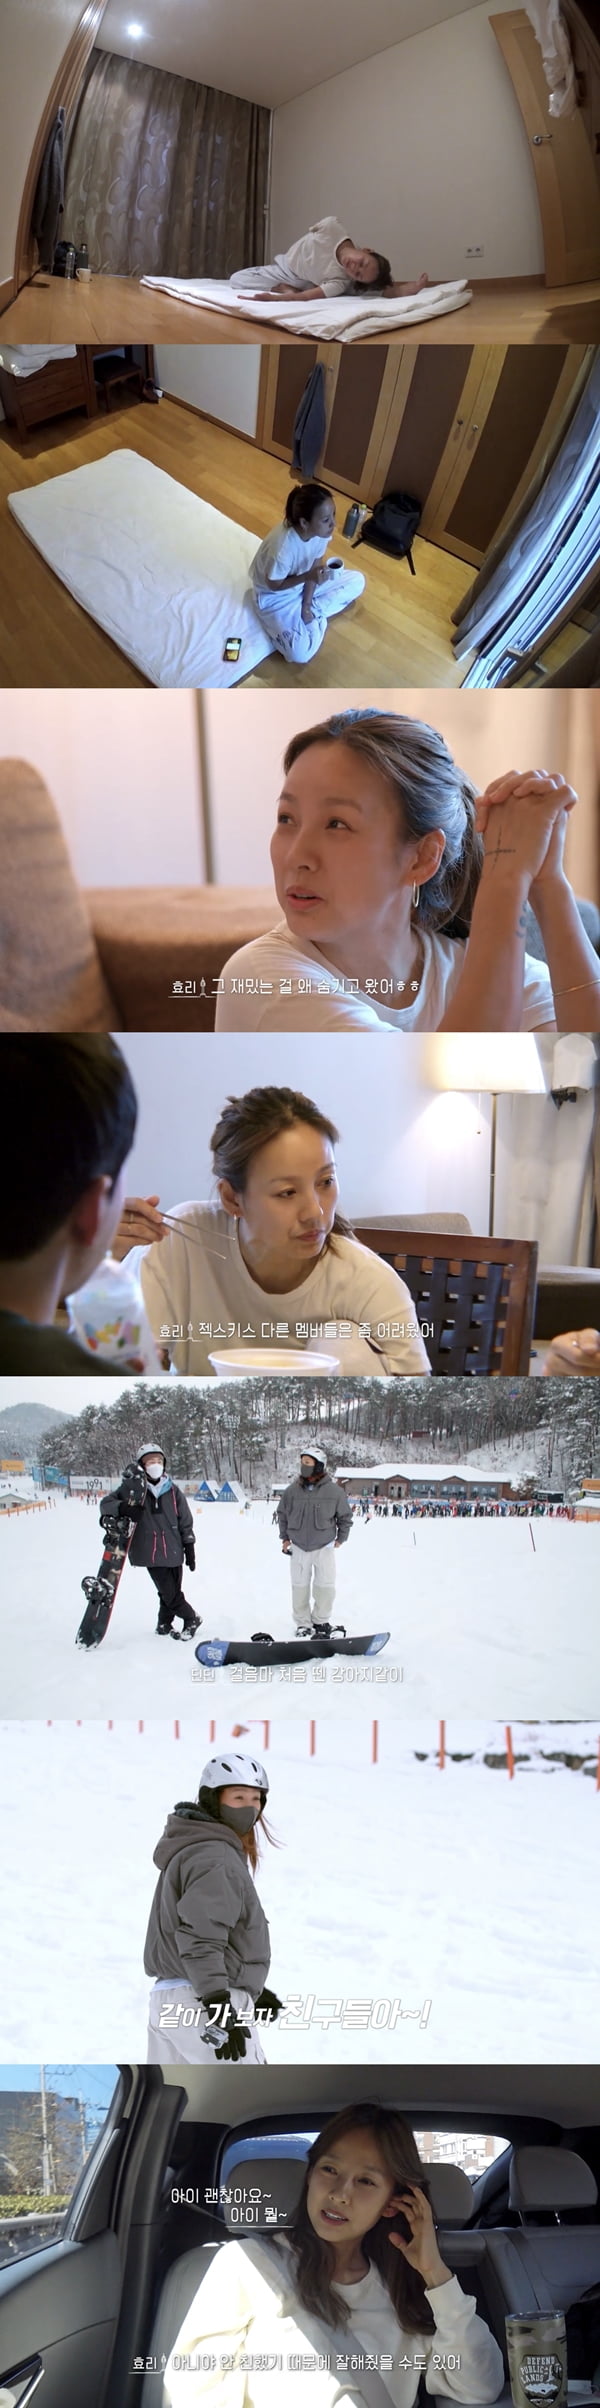 Lee Hyori mentioned Song Hye-kyo during a photo shoot.In the Teabing original Seoul Check In released on the 22nd, a story about the meeting of the dance singer wandering group who was united after the pilot and the skiing public broadcasting meeting was drawn.In the last two episodes, Lee Hyori traveled to the ski resort with Eun Ji-won from Techs Kies and Koyotae Kim Jong-min, Shin Ji and Dindin.Lee Hyori, who woke up at 6.30am, started the morning with yoga; soon after Shin Ji happened, with Kim Jong-min and Dindin joining.They gathered to learn yoga from Lee Hyori.Kim Jong-min lay on the floor and learned yoga to meet Lee Hyoris spell; following Kim Jong-min, Dindin also personally demonstrated.Kim Jong-min and Dindin were stumped, saying, Was yoga such a shame? Eun Ji-won also laughed, complaining of the pain, saying, Is this yoga movement?After breakfast after yoga, he began to talk about Dorandoran, who said: Sechs Kies other members were difficult, but my brother (Eun Ji-won) wasnt.The other members seemed to be hurt and hurt if they said anything. My brother was the first time I saw him. Kim Jong-min, who heard this, said: Are you born? Lee Hyori said, Youre just as old as you are. Then Kim Jong-min said, No!I am much better in the old days. After eating all the rice, the five people went out to board.Lee Hyori said, Lets ride before we get older.Lee Hyori, Eun Ji-won, Kim Jong-min, Shin Ji and Dindin started boarding.Lee Hyori said, I got the realization that we are young while riding the board, I remembered the old days when I was playing.I think Id want to be hip even when Im 60, Lee Hyori said, after arriving at Seoul for a photo shoot.Lee Hyori mentioned Park Na-rae while on the move with his manager, saying, Ive been drinking and calling again, and Ive already been drunk because I dont believe it because Im close.Photographer Hong Jang-hyun, who was filming the photo shoot on the day, also talked. Lee Hyori said, I shot a lot of album jackets and pictures.I decided to shoot because I saw a good new photographer, but I came late. I came in shaking. I do not remember what I said at that time. Also, Lee Hyori said, I might have done well because I wasnt close, Im very pretentious at first. Lee Hyori started making up for a photo shoot.Did you see Song Hye-kyo Smoky a while ago? It was so pretty, Lee Hyori told Makeup The Artist.Then, I asked Hong Jang-hyun if he could make smokey makeup.Hong said he could, but Lee Hyori said, It may not fit. Now it fits into a good face.Hong Jang-hyun and Makeup The Artist said, It doesnt fit. The person who succeeded in it. He is a pioneer pioneer.Lee Hyori said, I thought smokey did not fit when I was older, and somehow I thought it was better for me to give color to me as I got older.Lee Hyori said, When the housewives who liked makeup before came out with entertainers, I went to do this and I should try it again. He said, I want to try it too.I just should have done it as a smokey at the wedding. Lee Hyori finished her make-up and changed her costume and finished her preparation.Its Lee Hyori, who is in various costumes and is on the shoot.Lee Hyori, who sat back down to modify her makeup after changing into another outfit, tried to call her husband Lee Sang-soon on video.Lee Hyori said, When I was naked, I tried to call a video. Lee Sang-soon shouted Oh my God as soon as I received Lee Hyoris video call.Lee Sang-soon said, Send me something good and yes. Then Lee Hyori said, Ill let you go and let you go.Lee Hyori asked Lee Sang-soon, What are you doing? Lee Sang-soon replied, I have to walk my dog in a little while.Lee Hyori said good and Lee Sang-soon responded youre good; also Lee Hyori responded, Stop.I do not go today. 